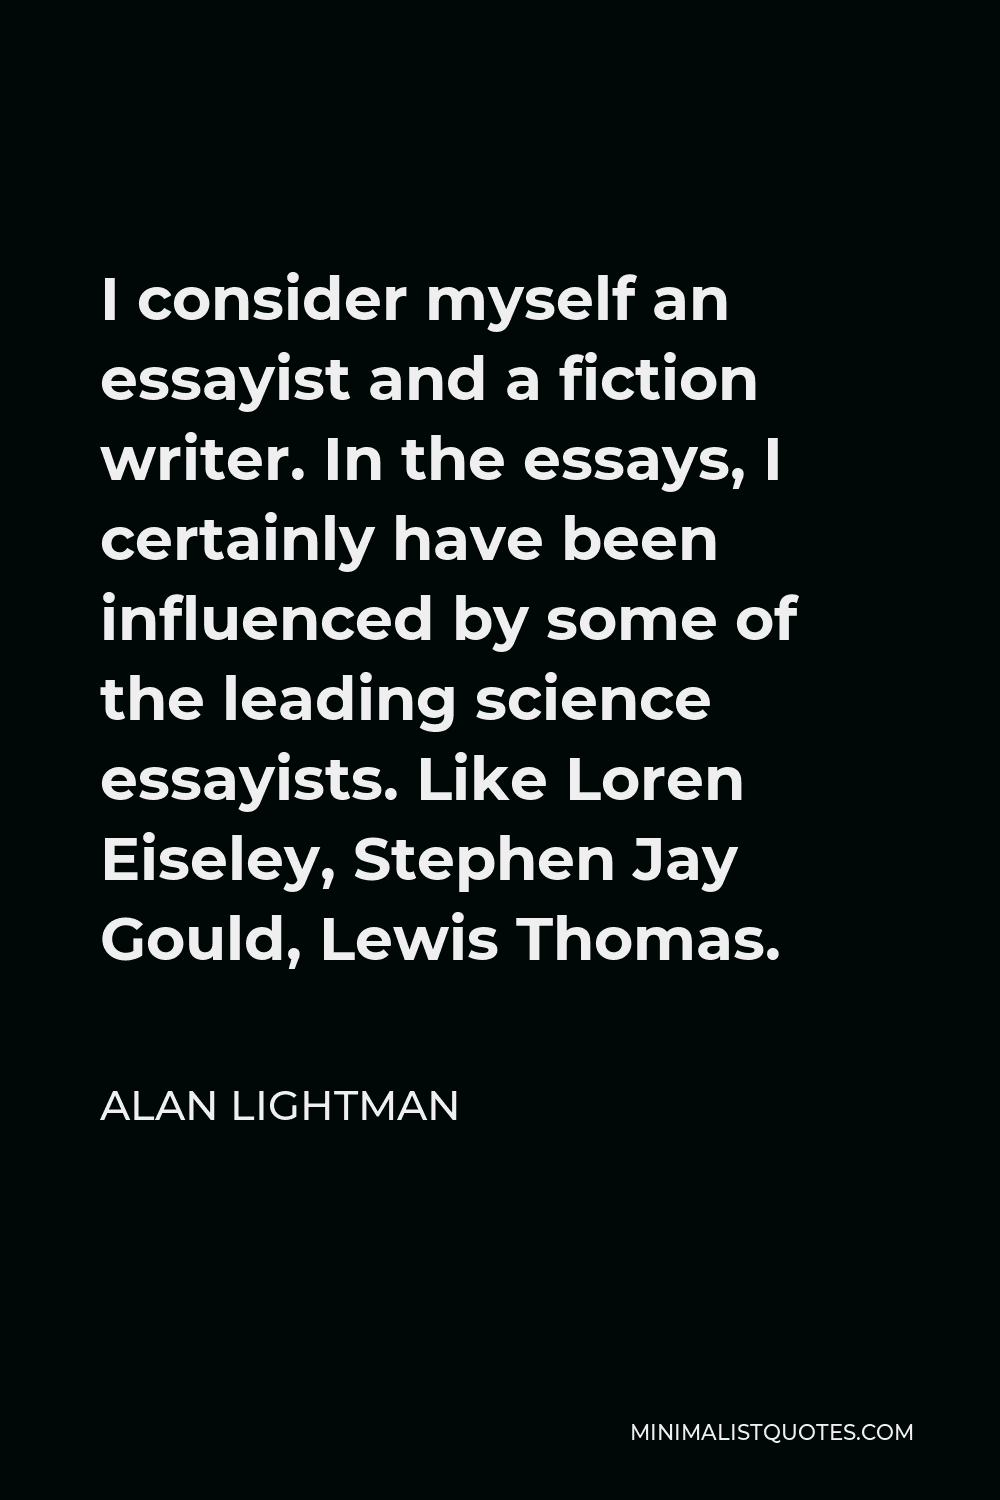 Alan Lightman Quote - I consider myself an essayist and a fiction writer. In the essays, I certainly have been influenced by some of the leading science essayists. Like Loren Eiseley, Stephen Jay Gould, Lewis Thomas.